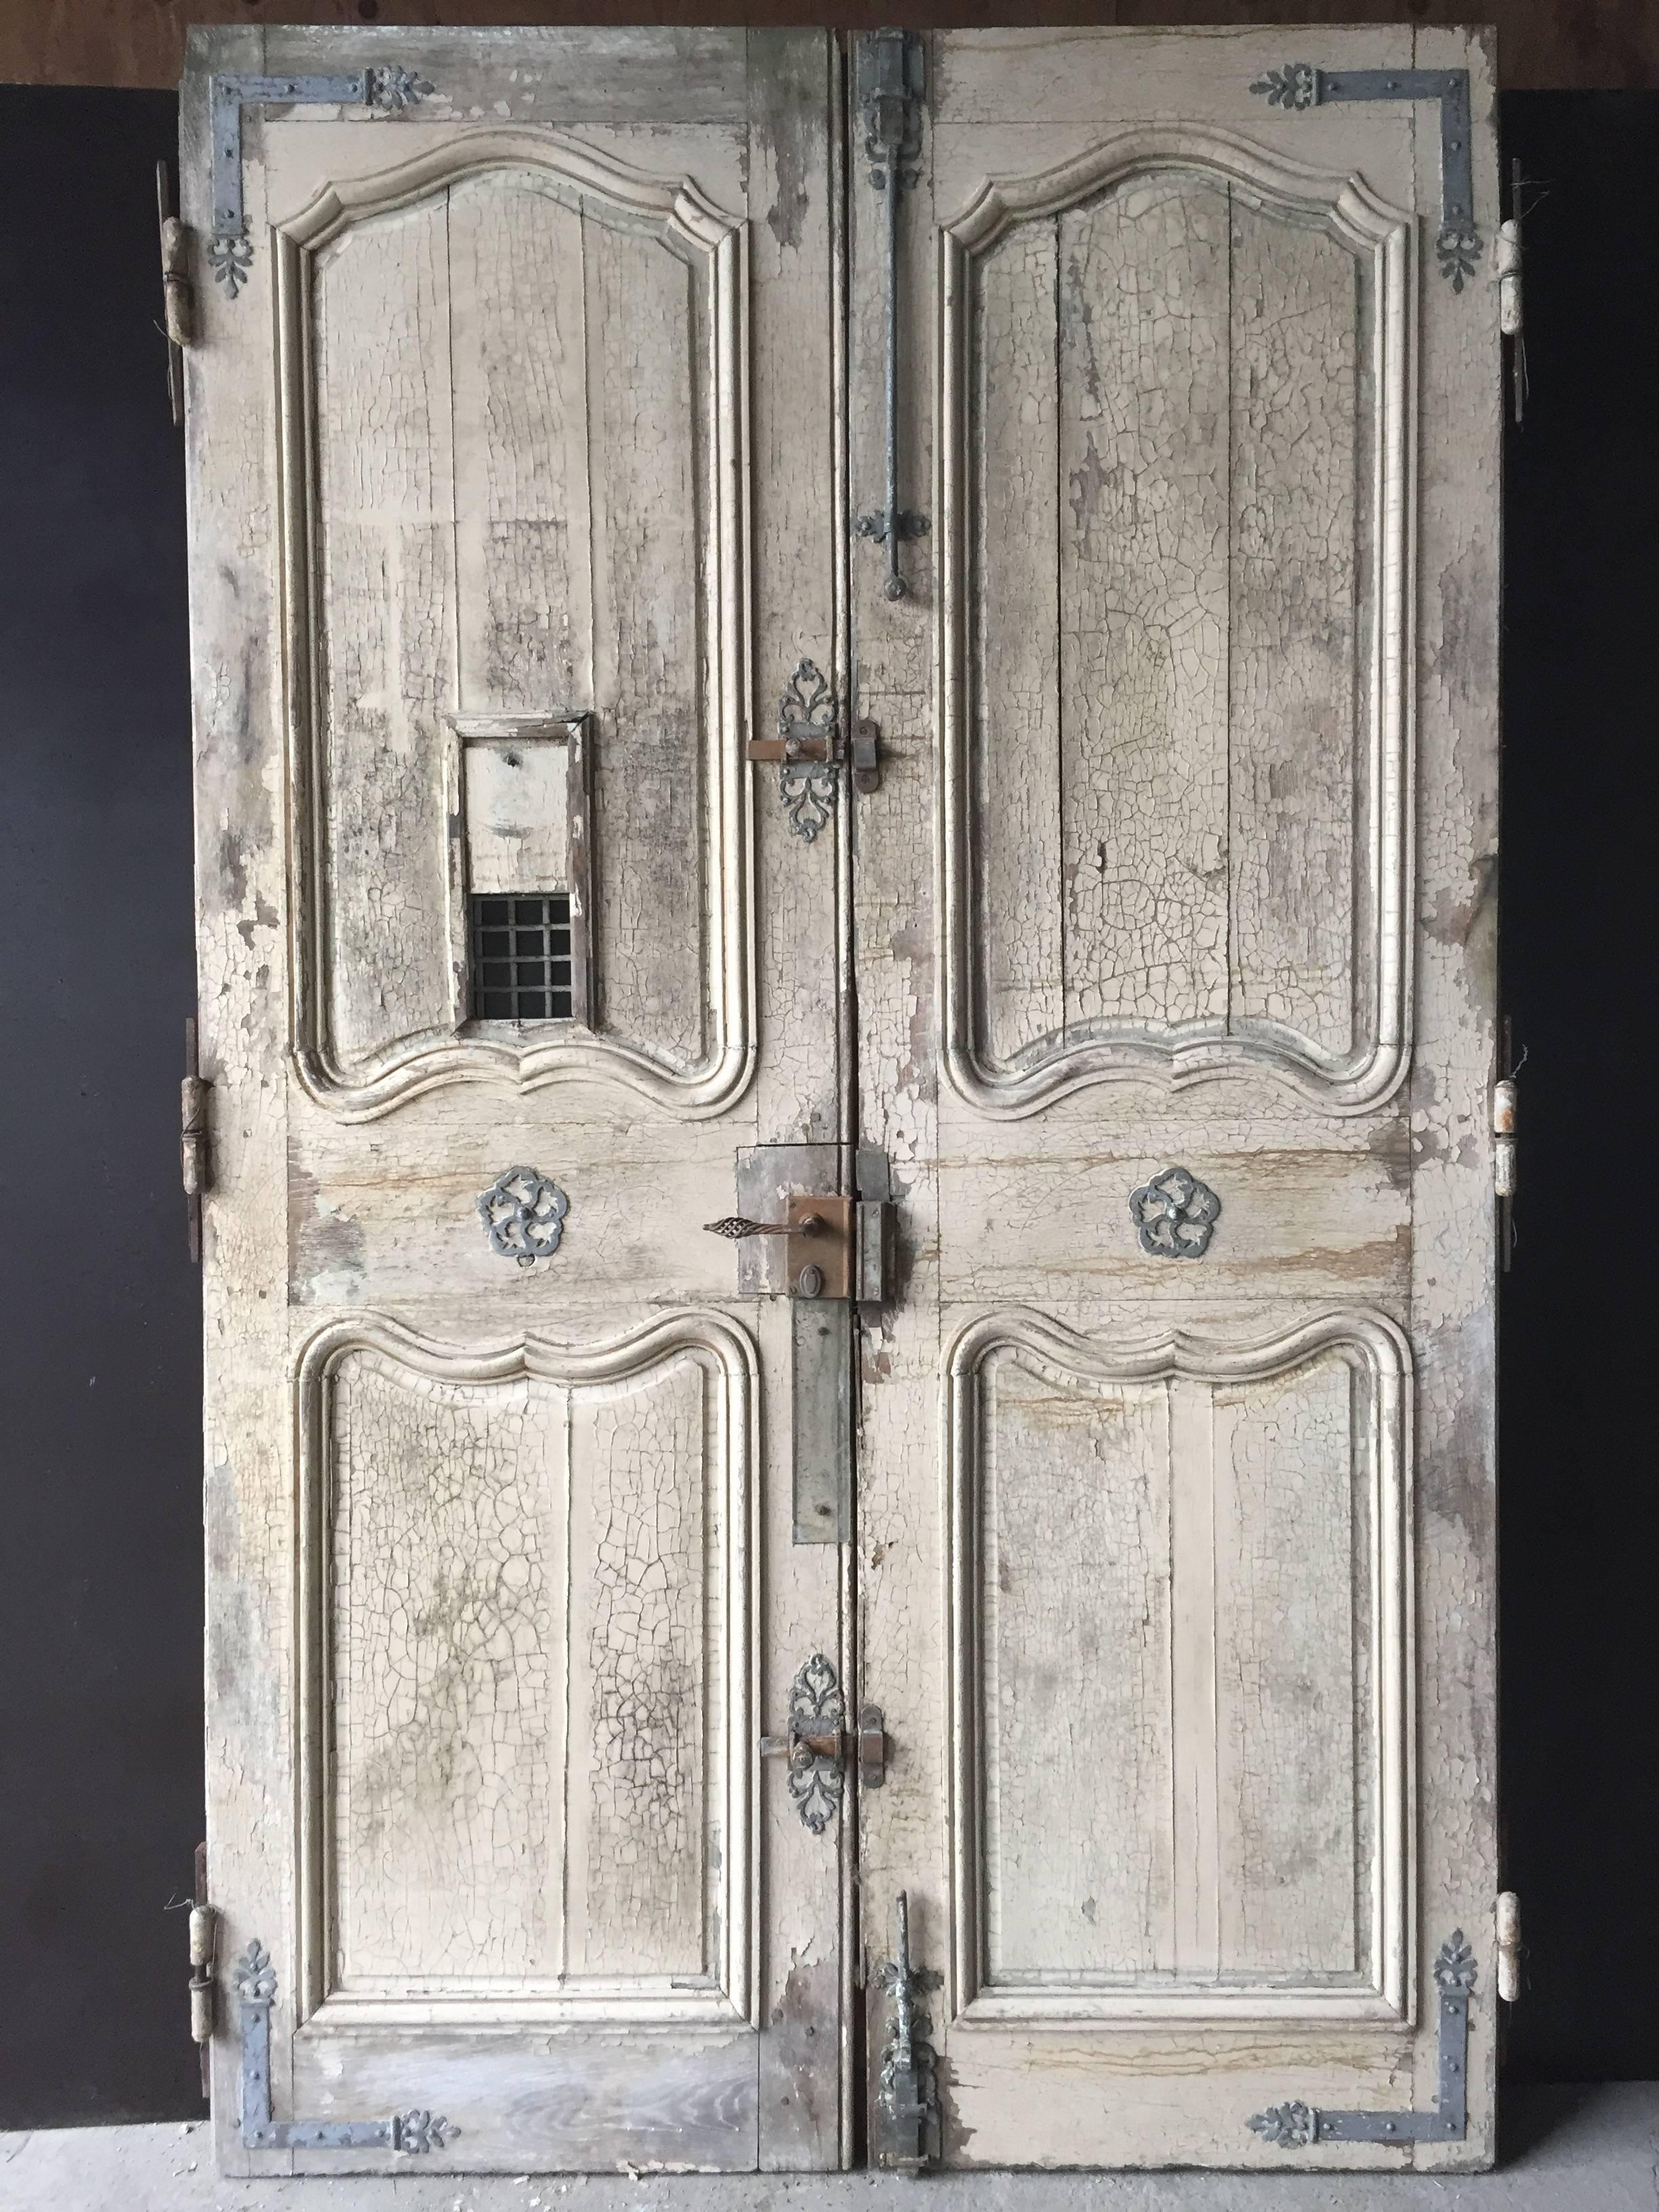 A rare set of original and authentic French chateaux front entrance doors (original pair), 18th century period, France.

Exquisite quality of handcrafted from 17th century.
Double faces, very thick and heavy.
Solid French antique wood oak from